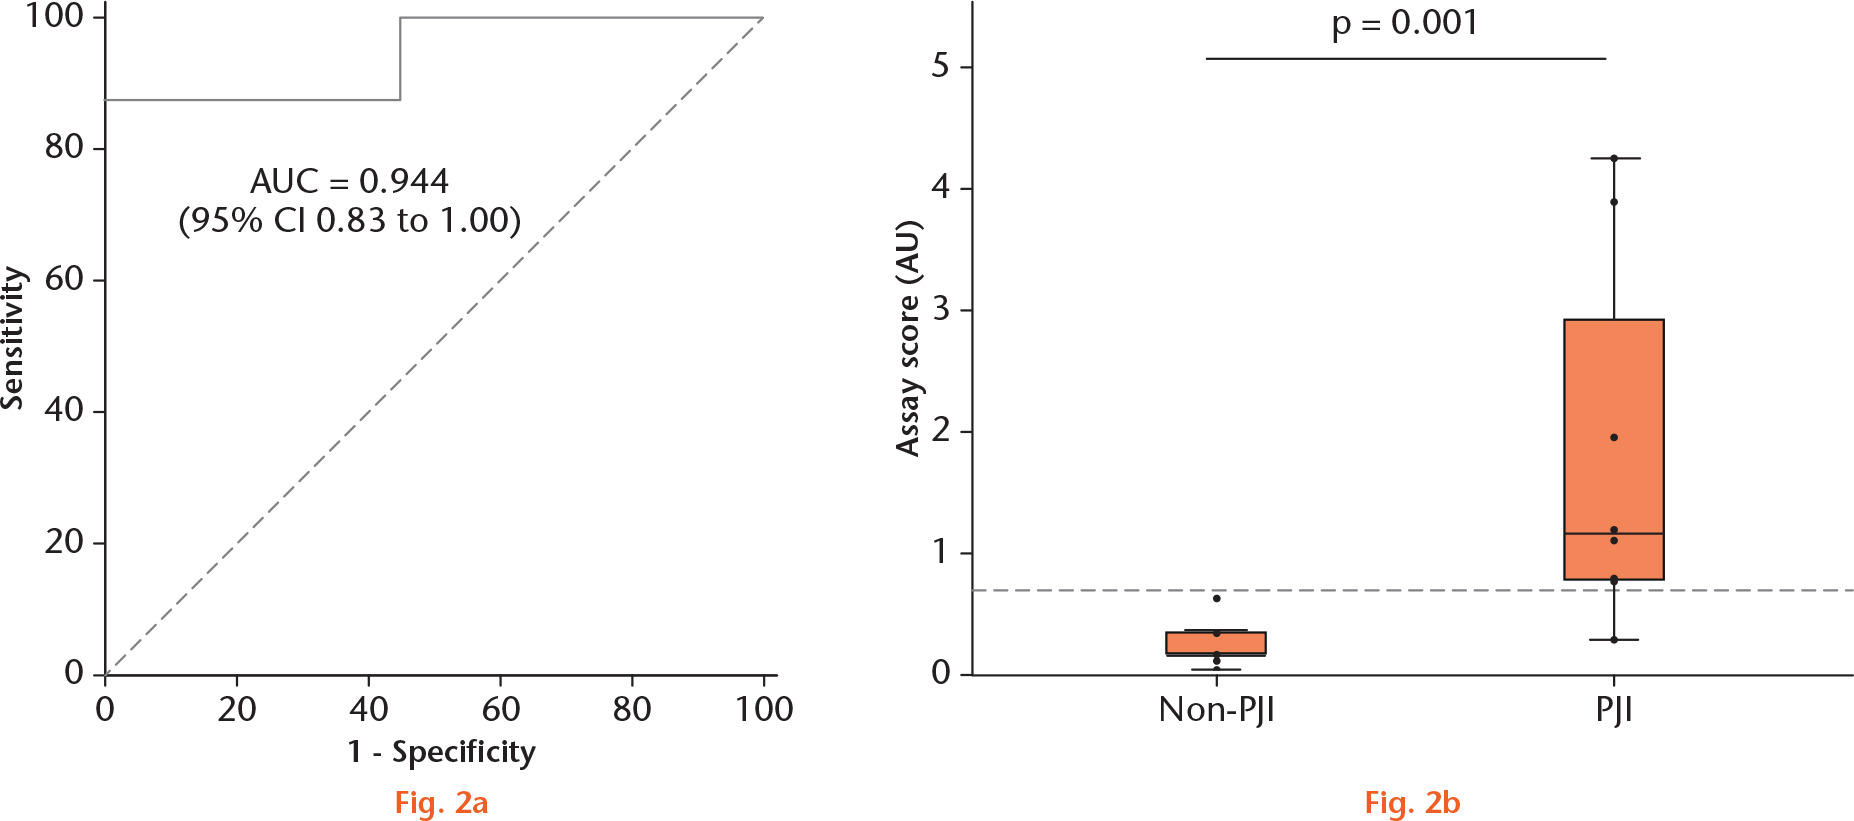  
            General test performance using the proof-of-principle cohort: a) receiver operating characteristic (ROC) curve for the 16s rDNA test based on the calculated ratio between test and control band to determine the optimal cut-off value to differentiate between periprosthetic joint infection (PJI) and non-PJI samples; and b) box-whisker plot displaying the performance of the 16s rDNA test to differentiate between PJI (n = 8) and non-PJI (n = 9) samples in the proof-of-principle cohort. Dashed lines indicate the optimal cut-off as determined by previous ROC analysis. The Mann–Whitney U test was used to obtain p-values. AUC, area under the curve; CI, confidence interval; AU, assay unit.
          